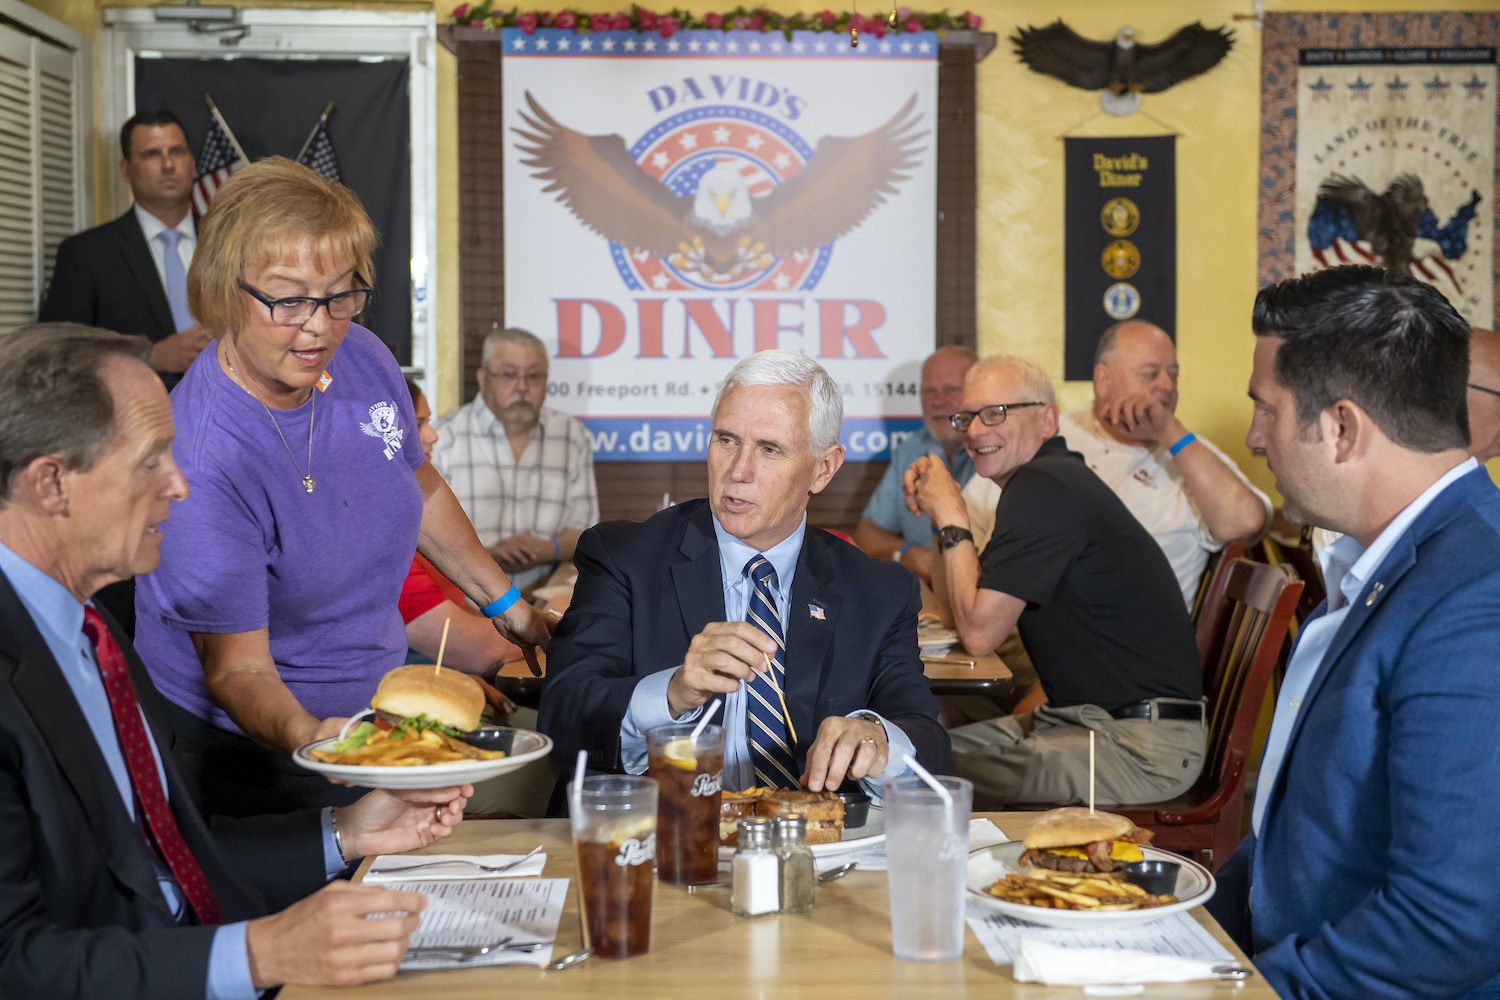 Sen. Pat Toomey, left, Vice President Mike Pence, center, and Sean Parnell, right, who is taking on Rep. Conor Lamb in the 17th Congressional District, are served lunch by waitress Denise, Friday, June 12, 2020, at David's Diner in Springdale, Pa. Pence's visit is the first stop part of the 